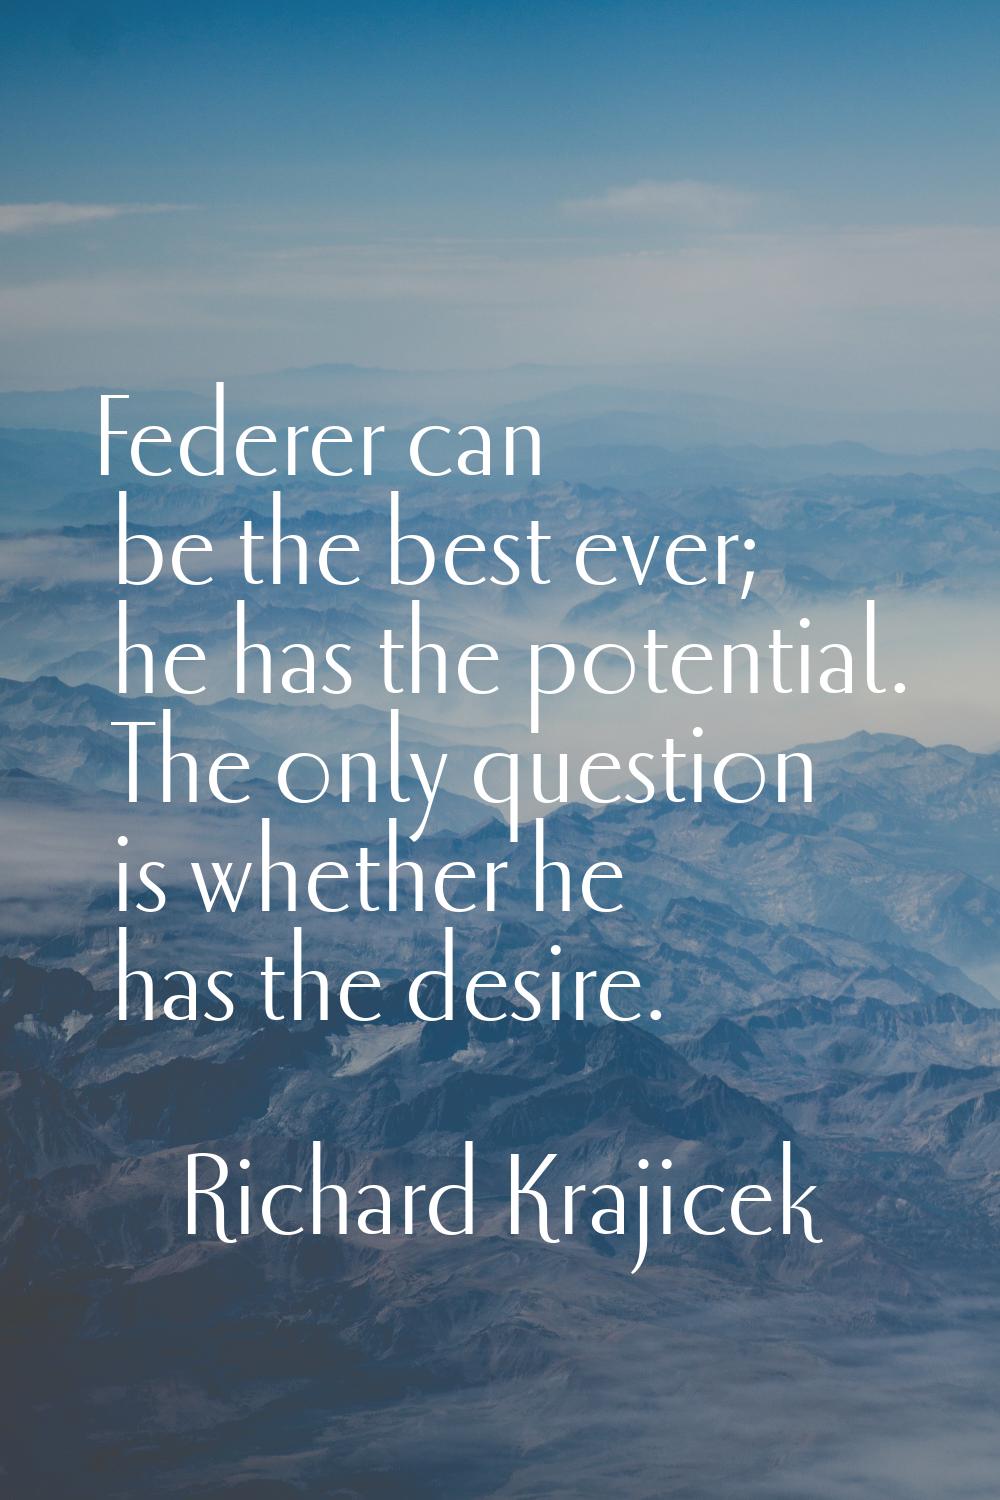 Federer can be the best ever; he has the potential. The only question is whether he has the desire.